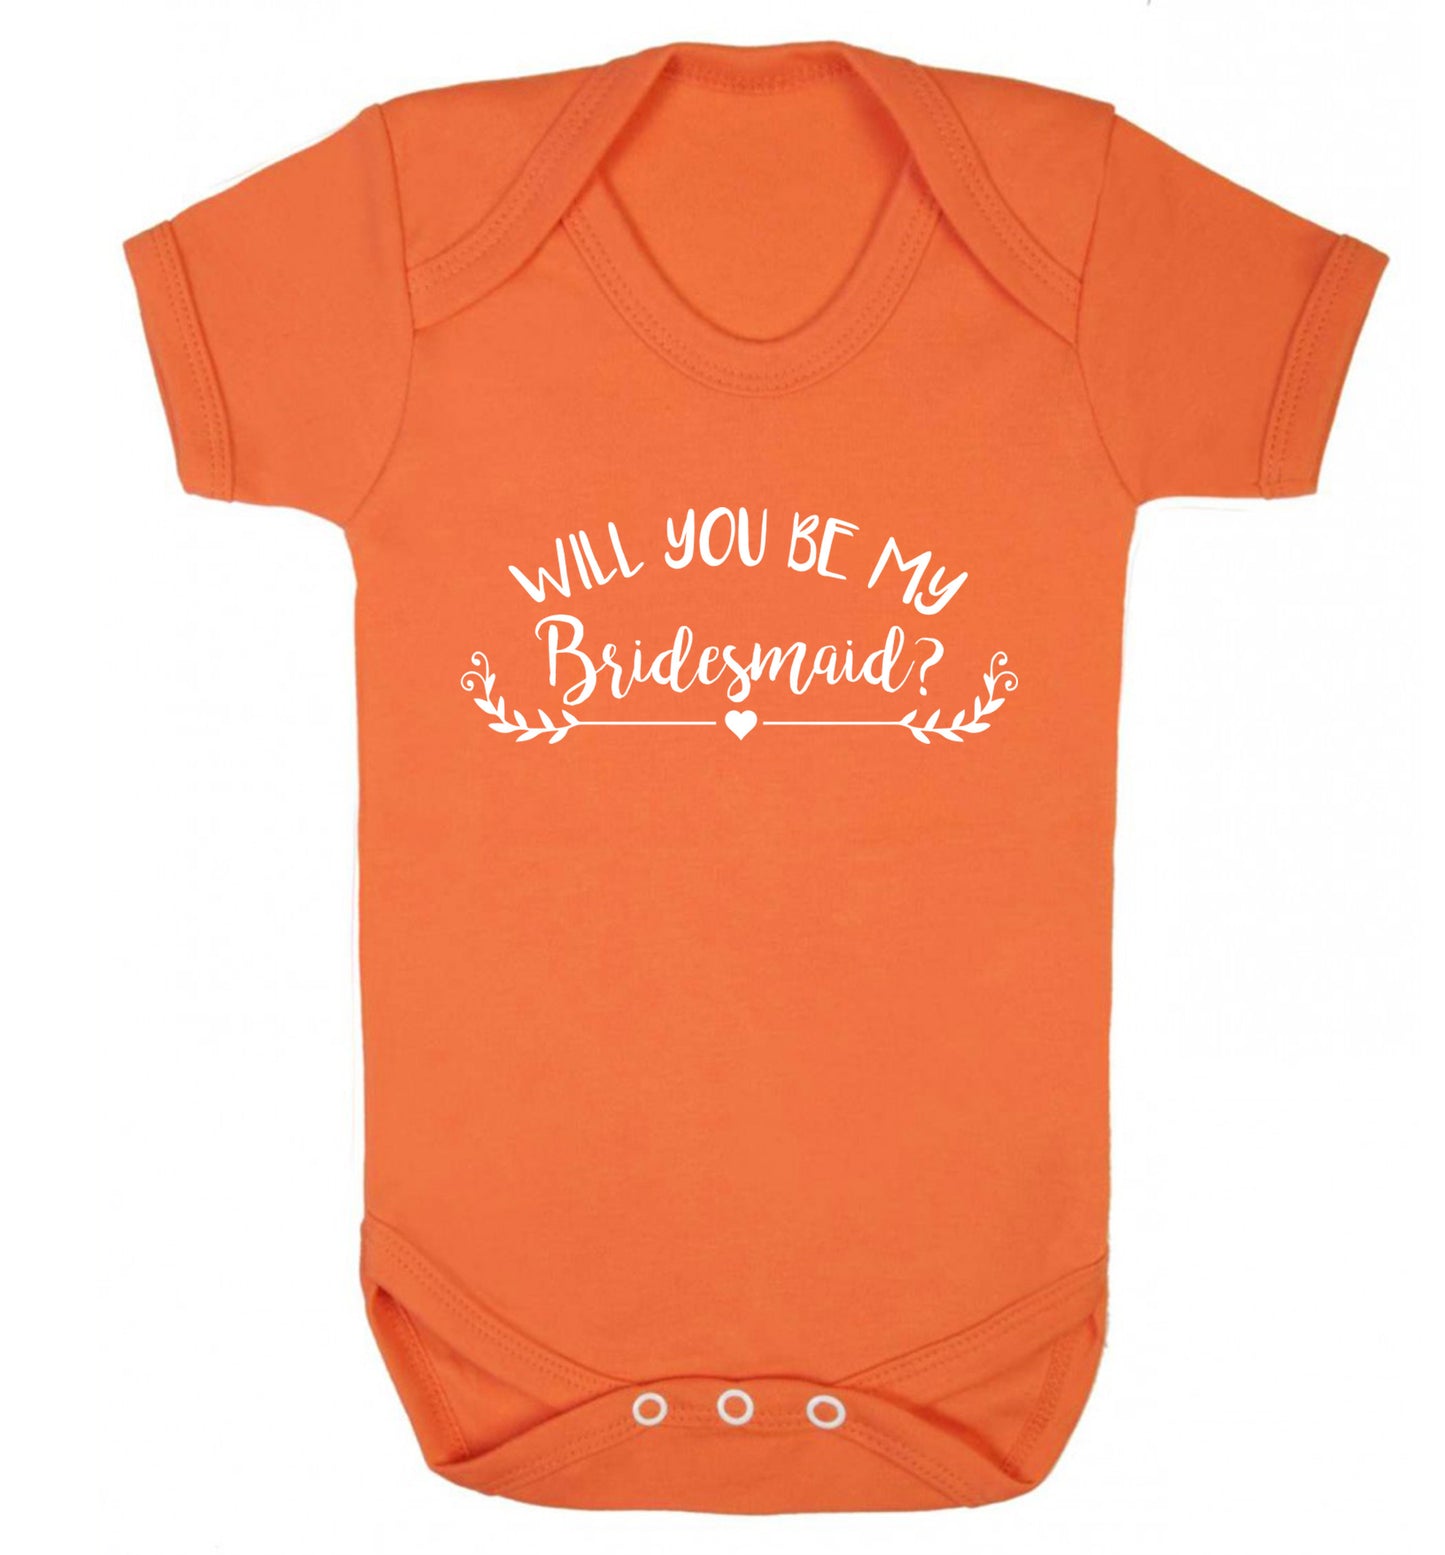 Will you be my bridesmaid? Baby Vest orange 18-24 months